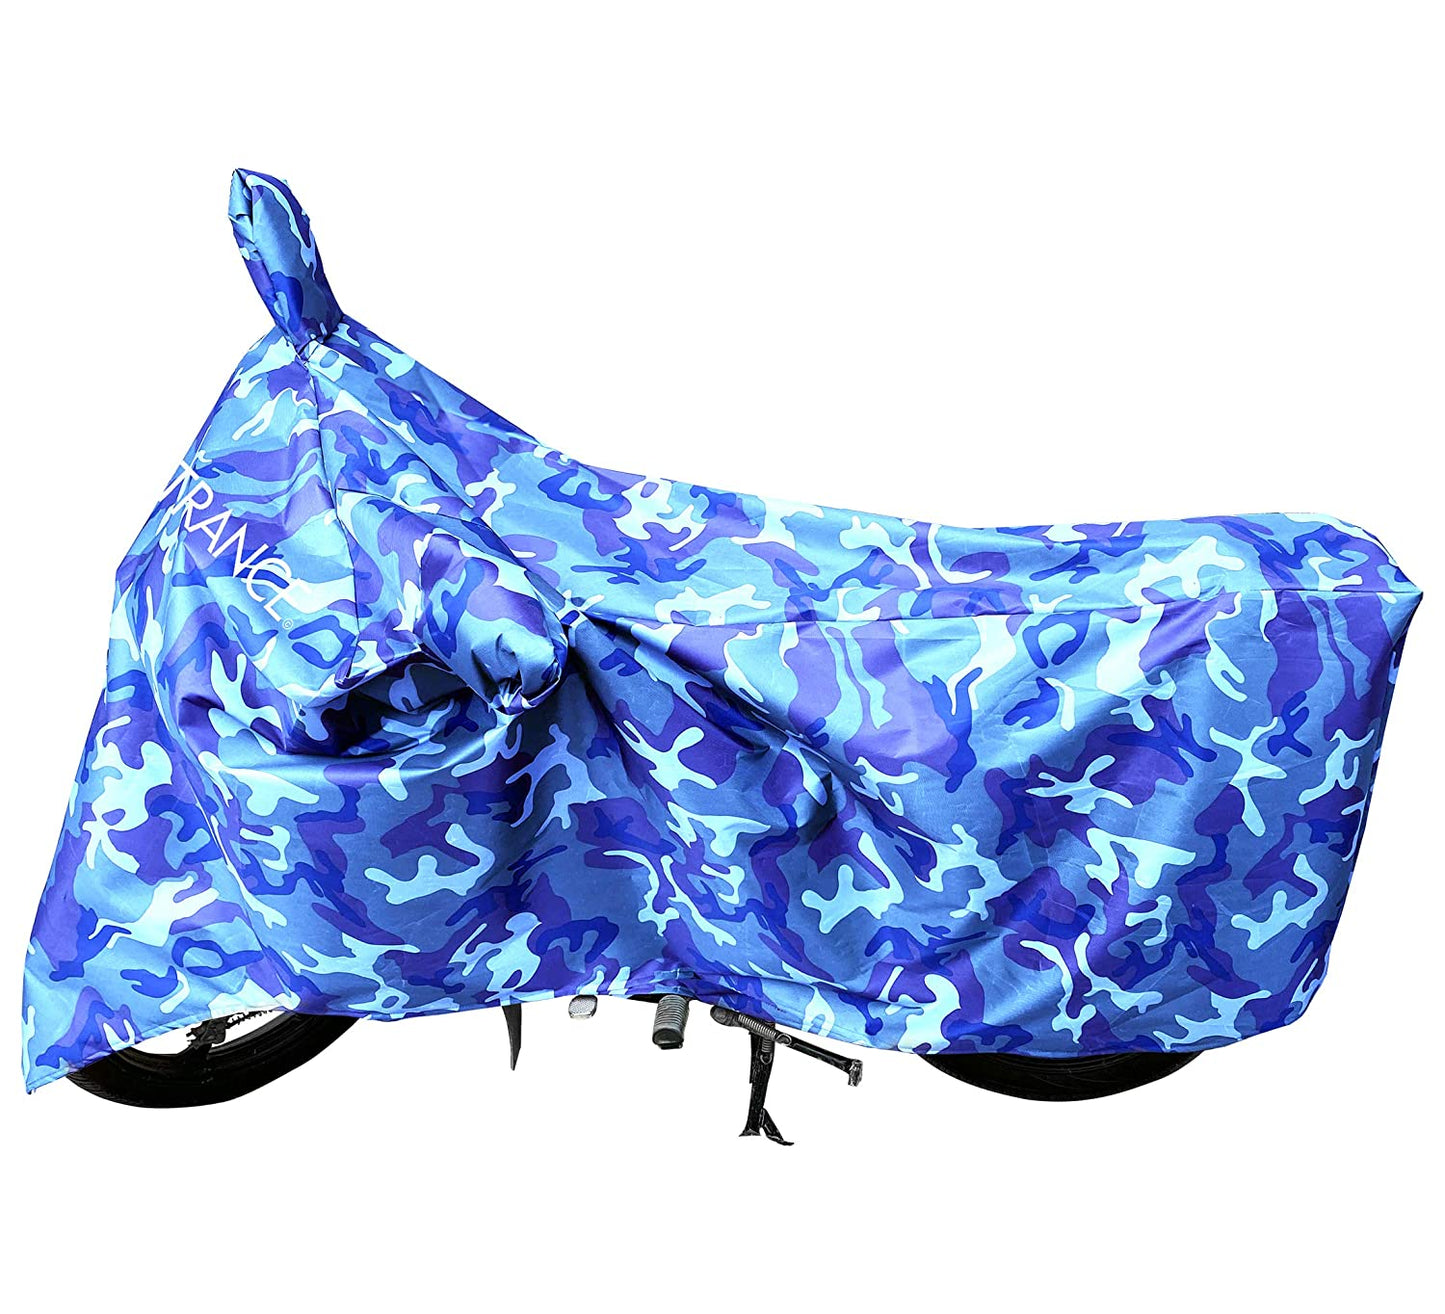 MotoTrance Jungle Bike Body Covers For Hero Electric NYX - Interlock-Stitched Waterproof and Heat Resistant with Mirror Pockets